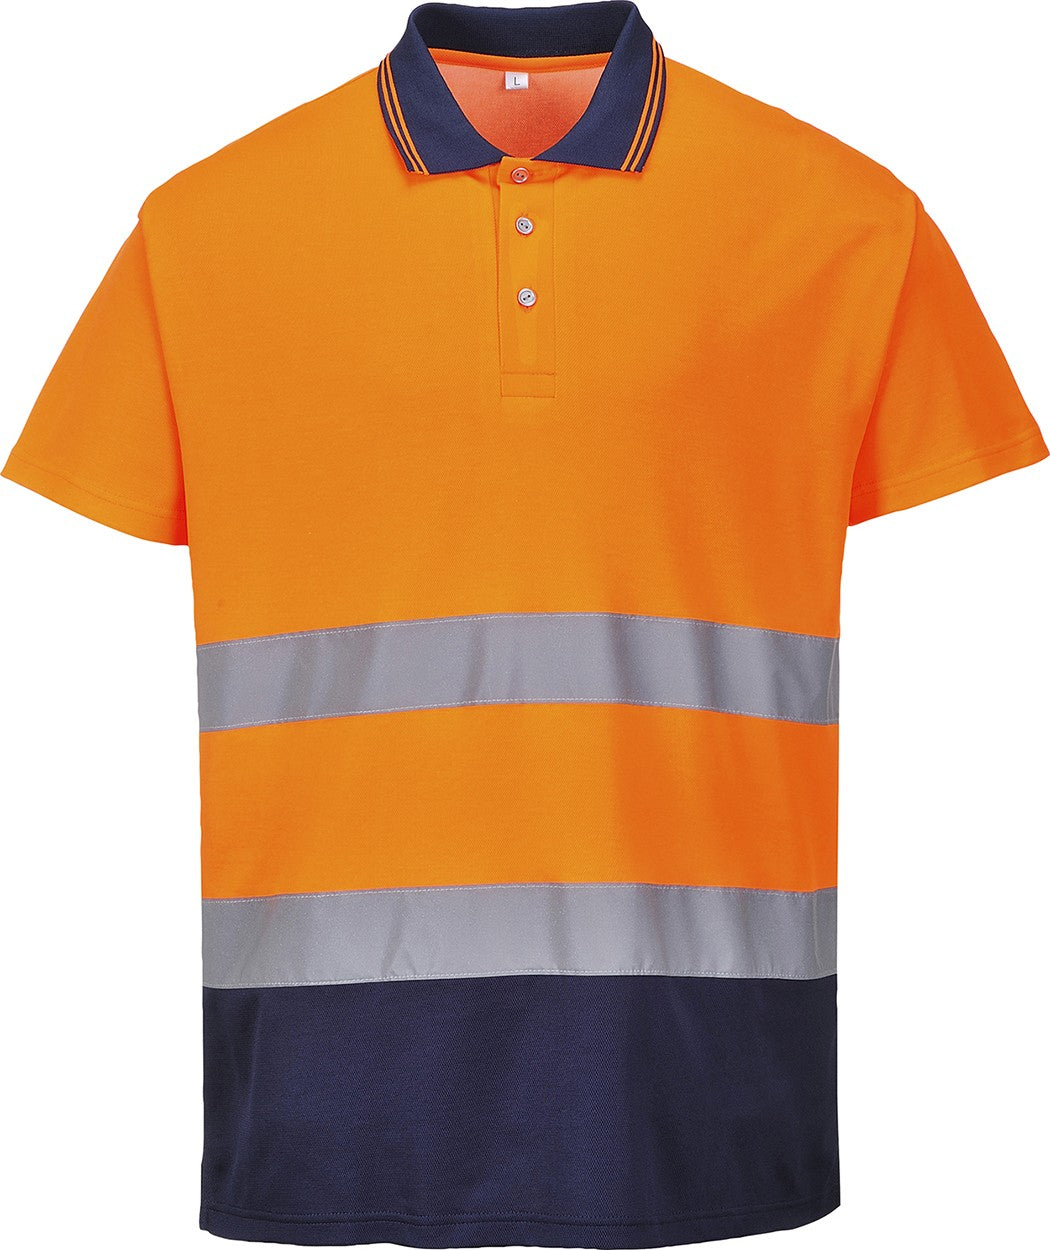 Portwest S174 Two Tone Work Polo High Visibility Navy/Orange